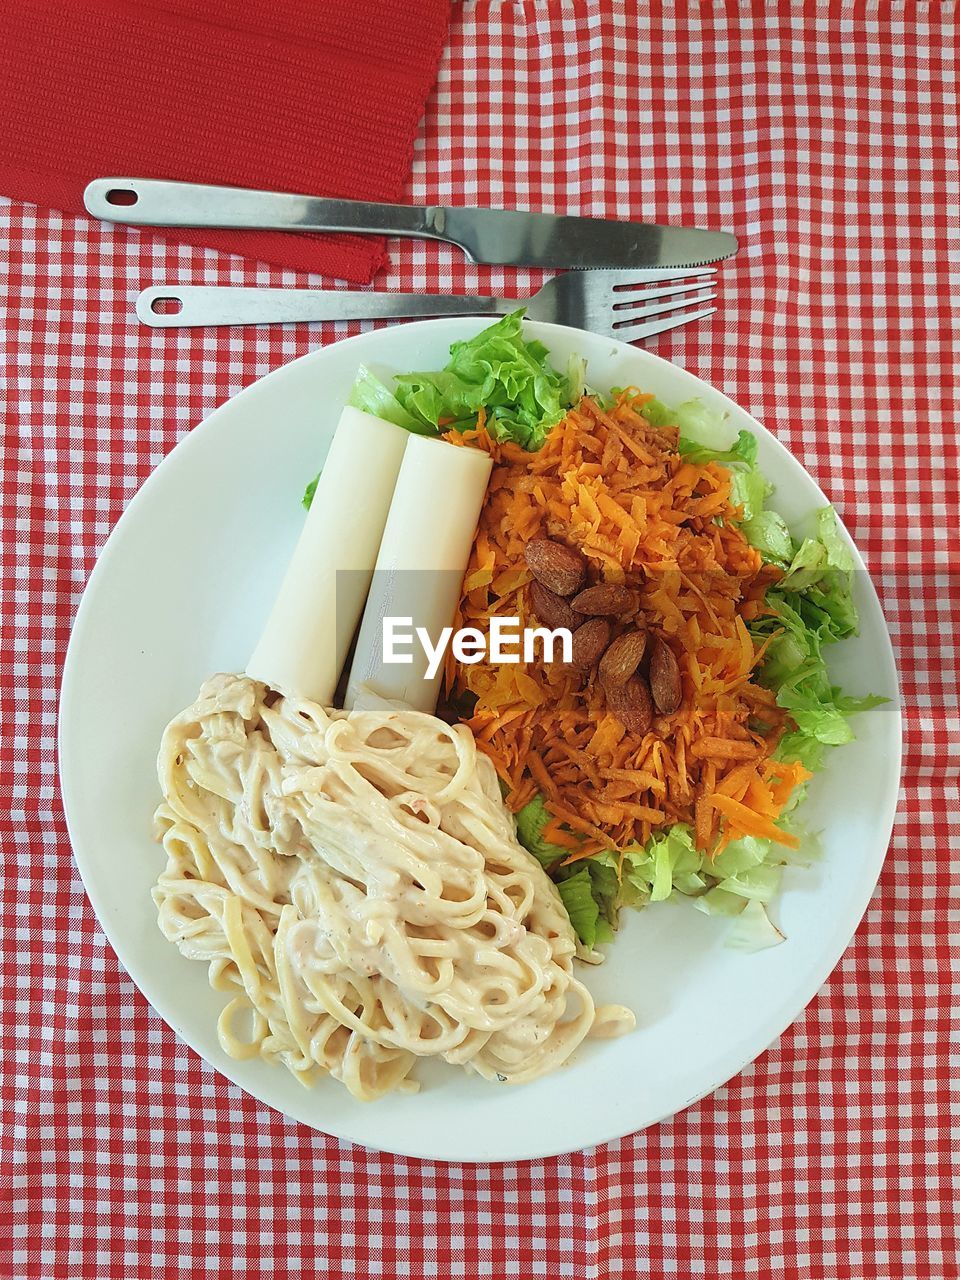 HIGH ANGLE VIEW OF FOOD IN PLATE